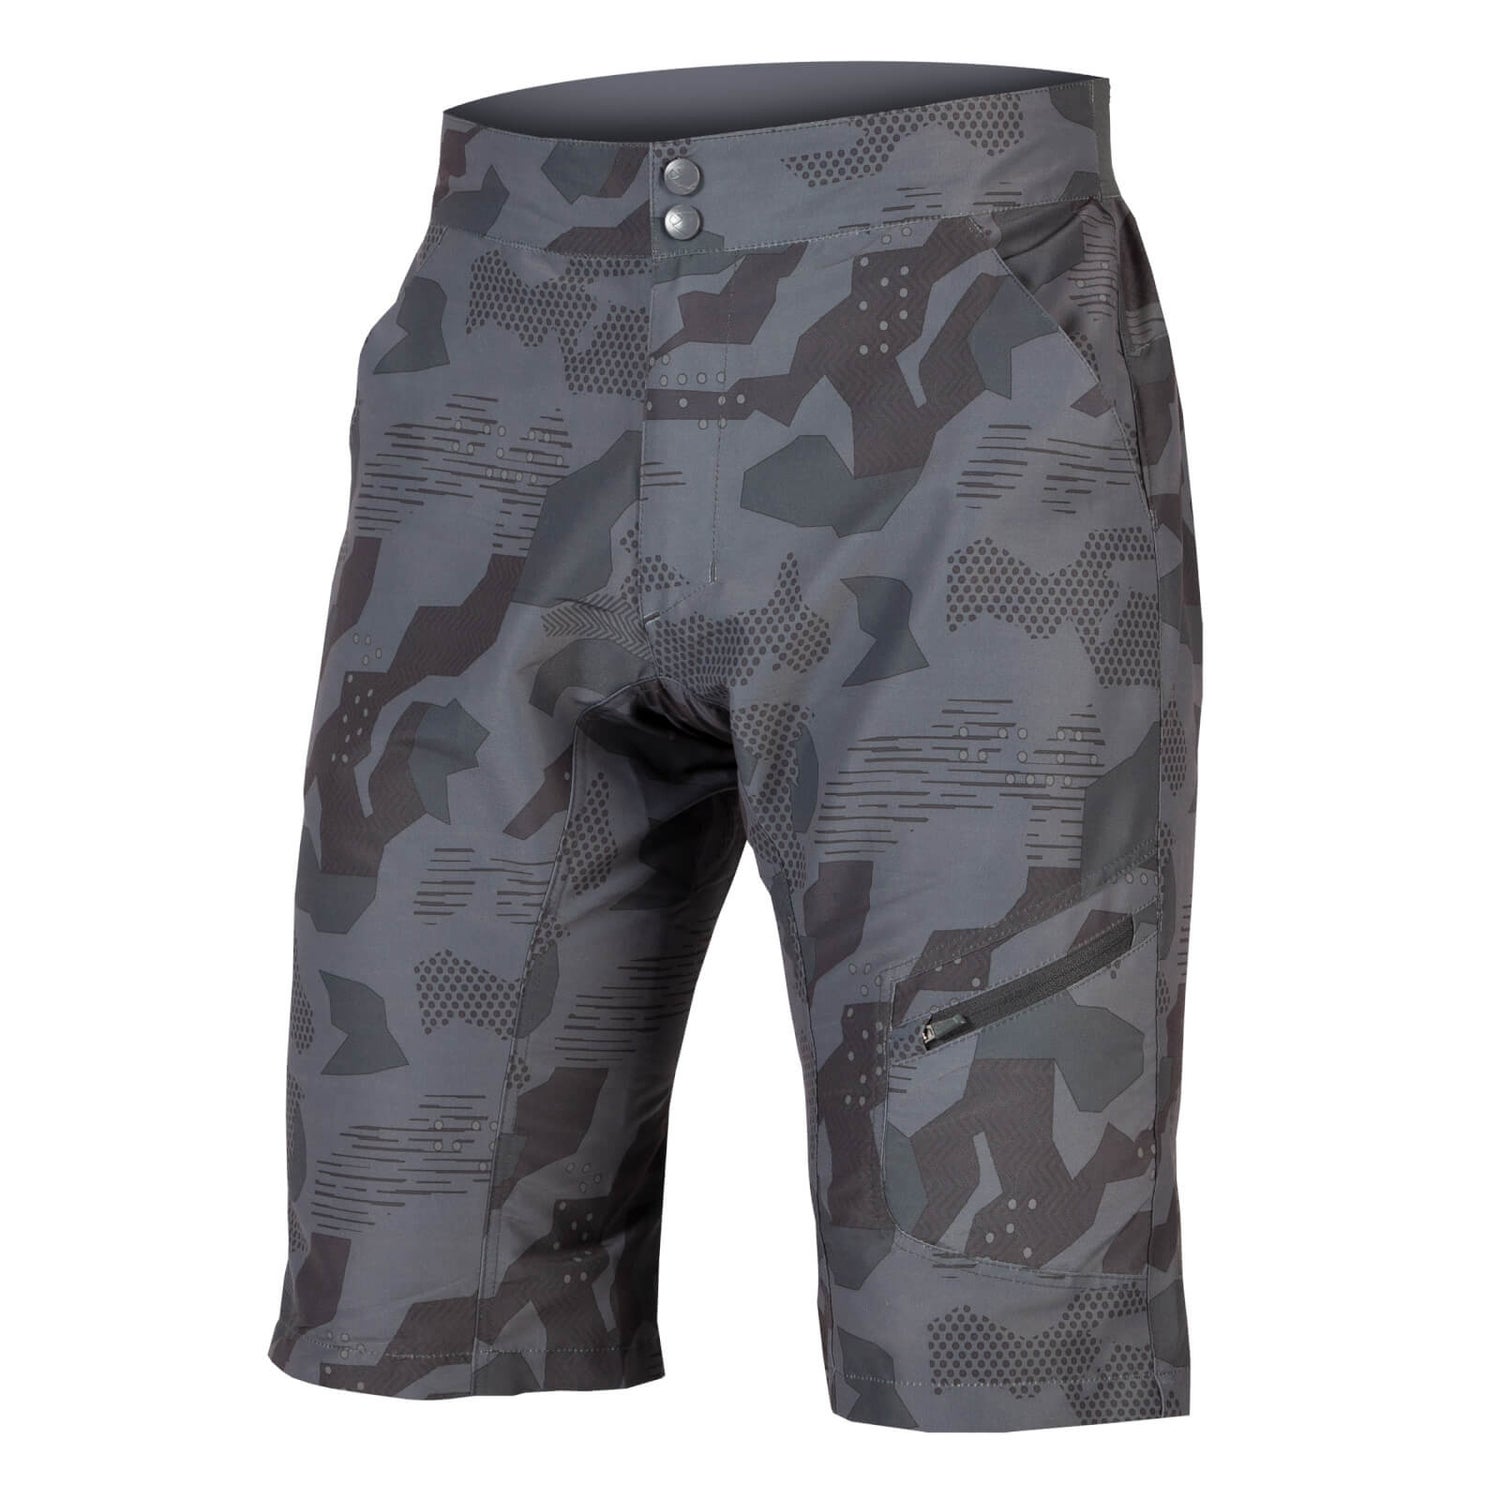 Hummvee Lite Short with Liner - Tonal Anthracite - XXL